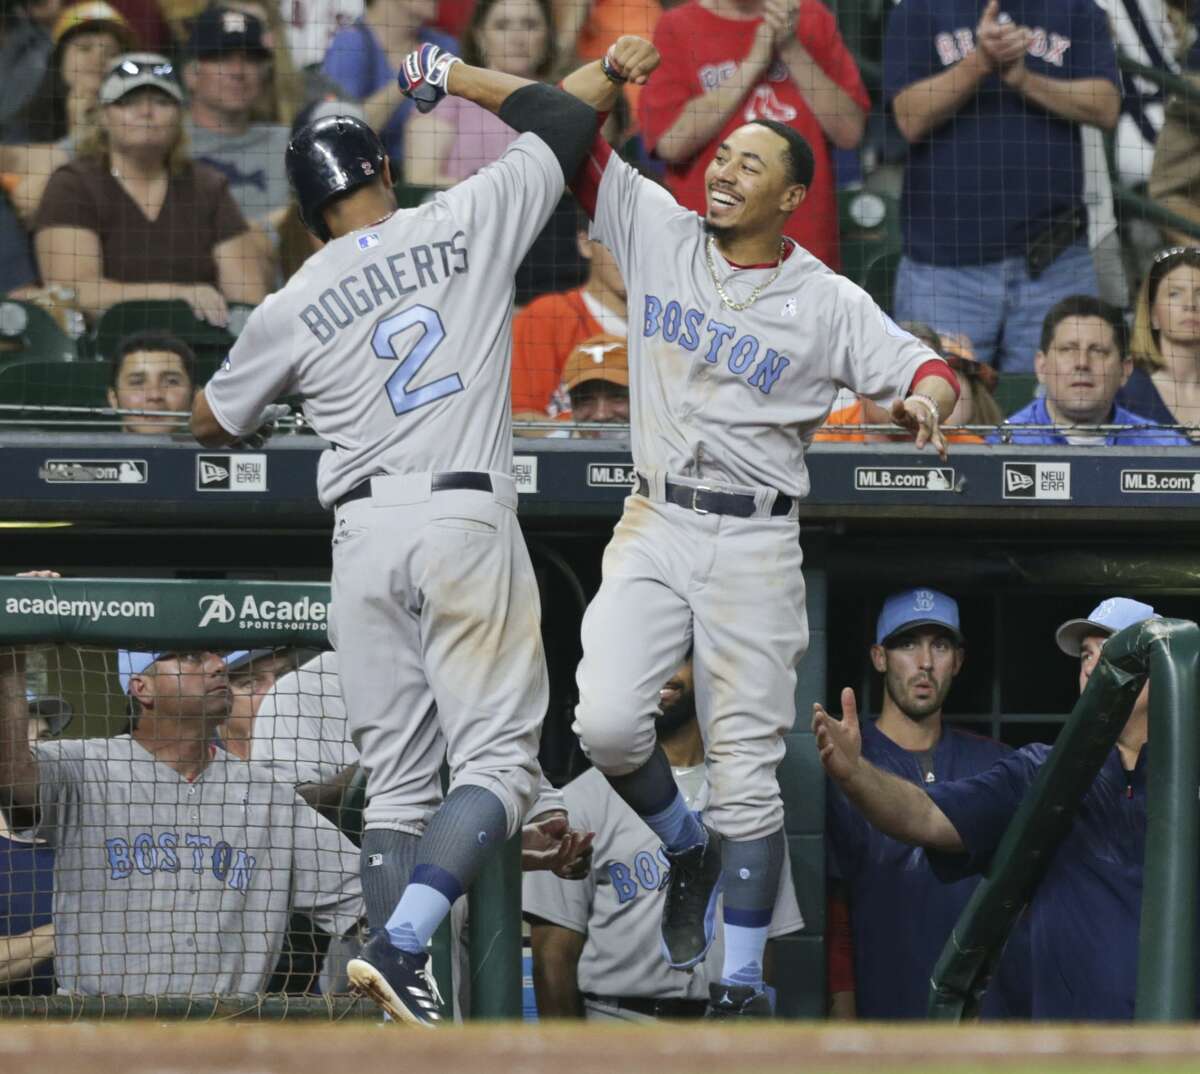 Boston Red Sox shortstop Xander Bogaerts (2) and Mookie Betts (50) celebrate his second home run of the night during the top sixth inning of the game at Minute Maid Park Sunday, June 18, 2017, in Houston. ( Yi-Chin Lee / Houston Chronicle )